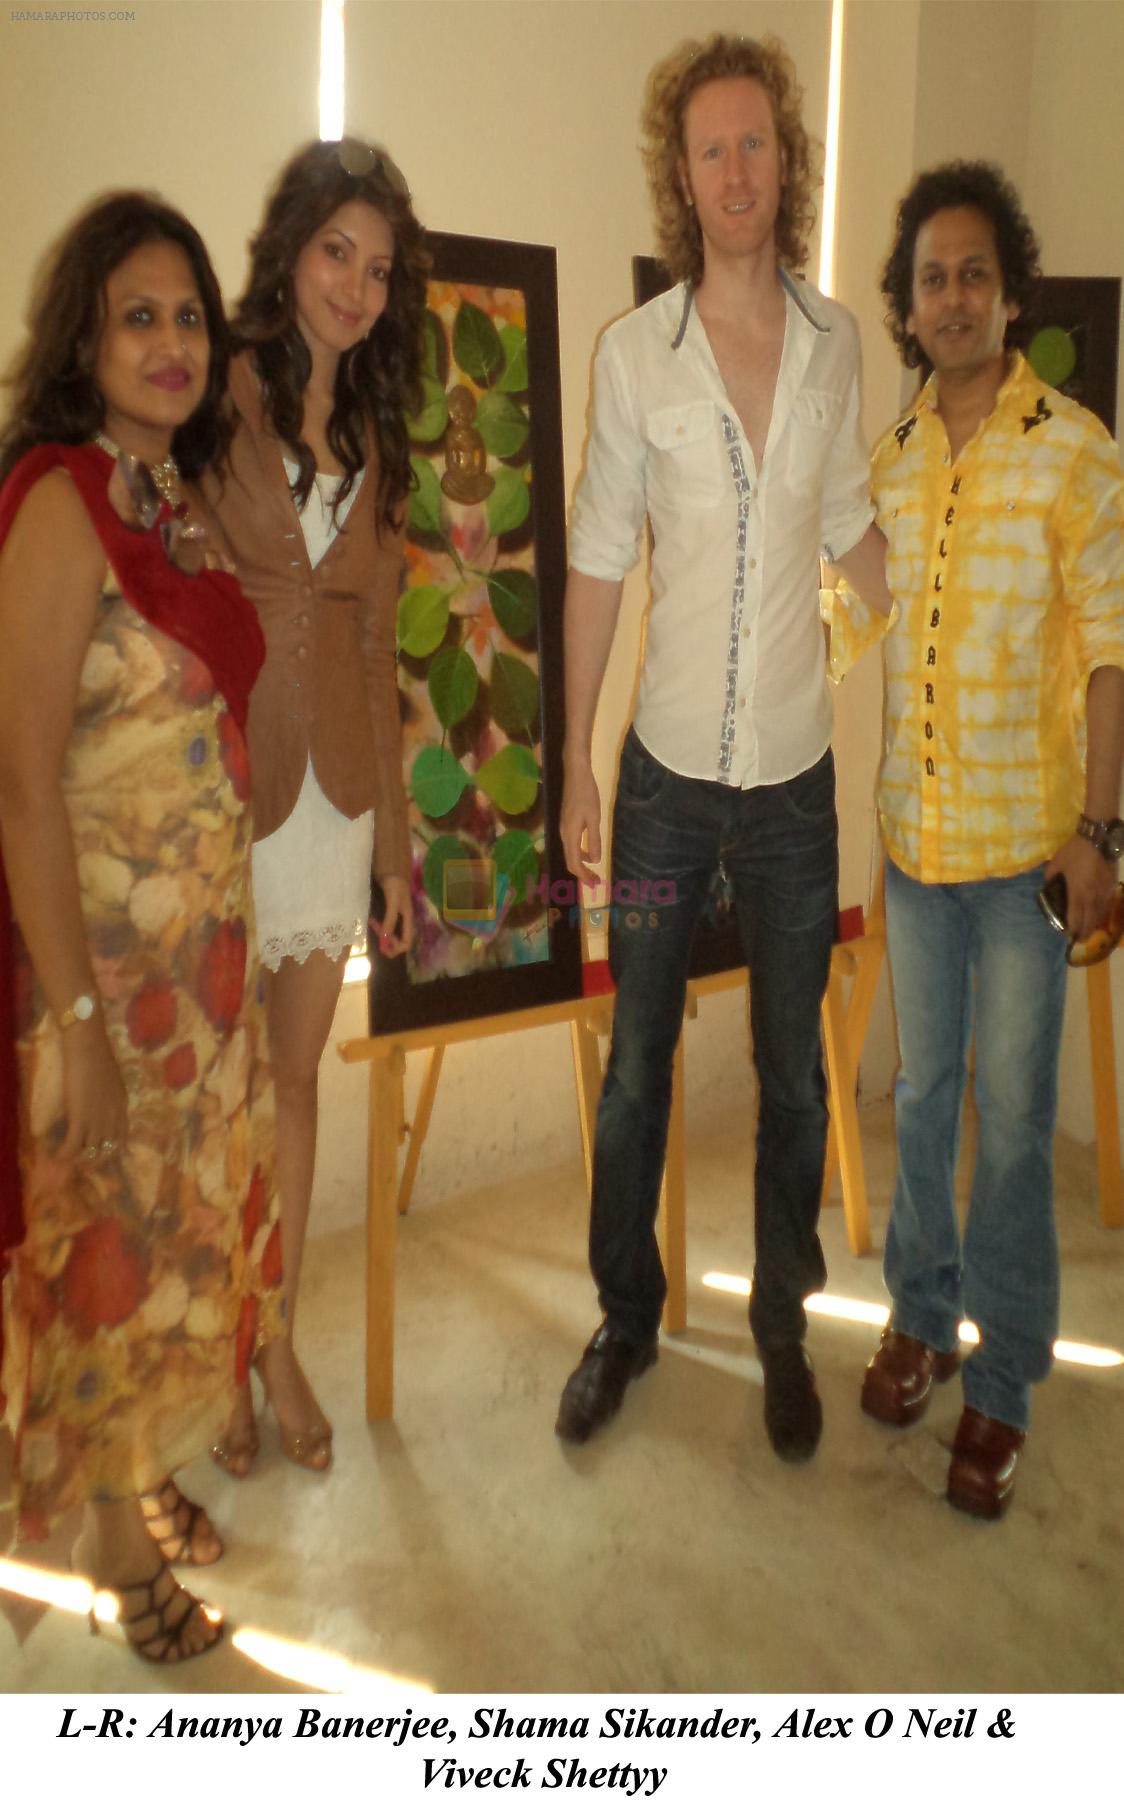 Ananya Banerjee, Shama Sikander, Alex O Neil & Viveck Shettyy at the Art and Fashion Brunch in The Wedding Cafe n Lounge on 22nd Jan 2012